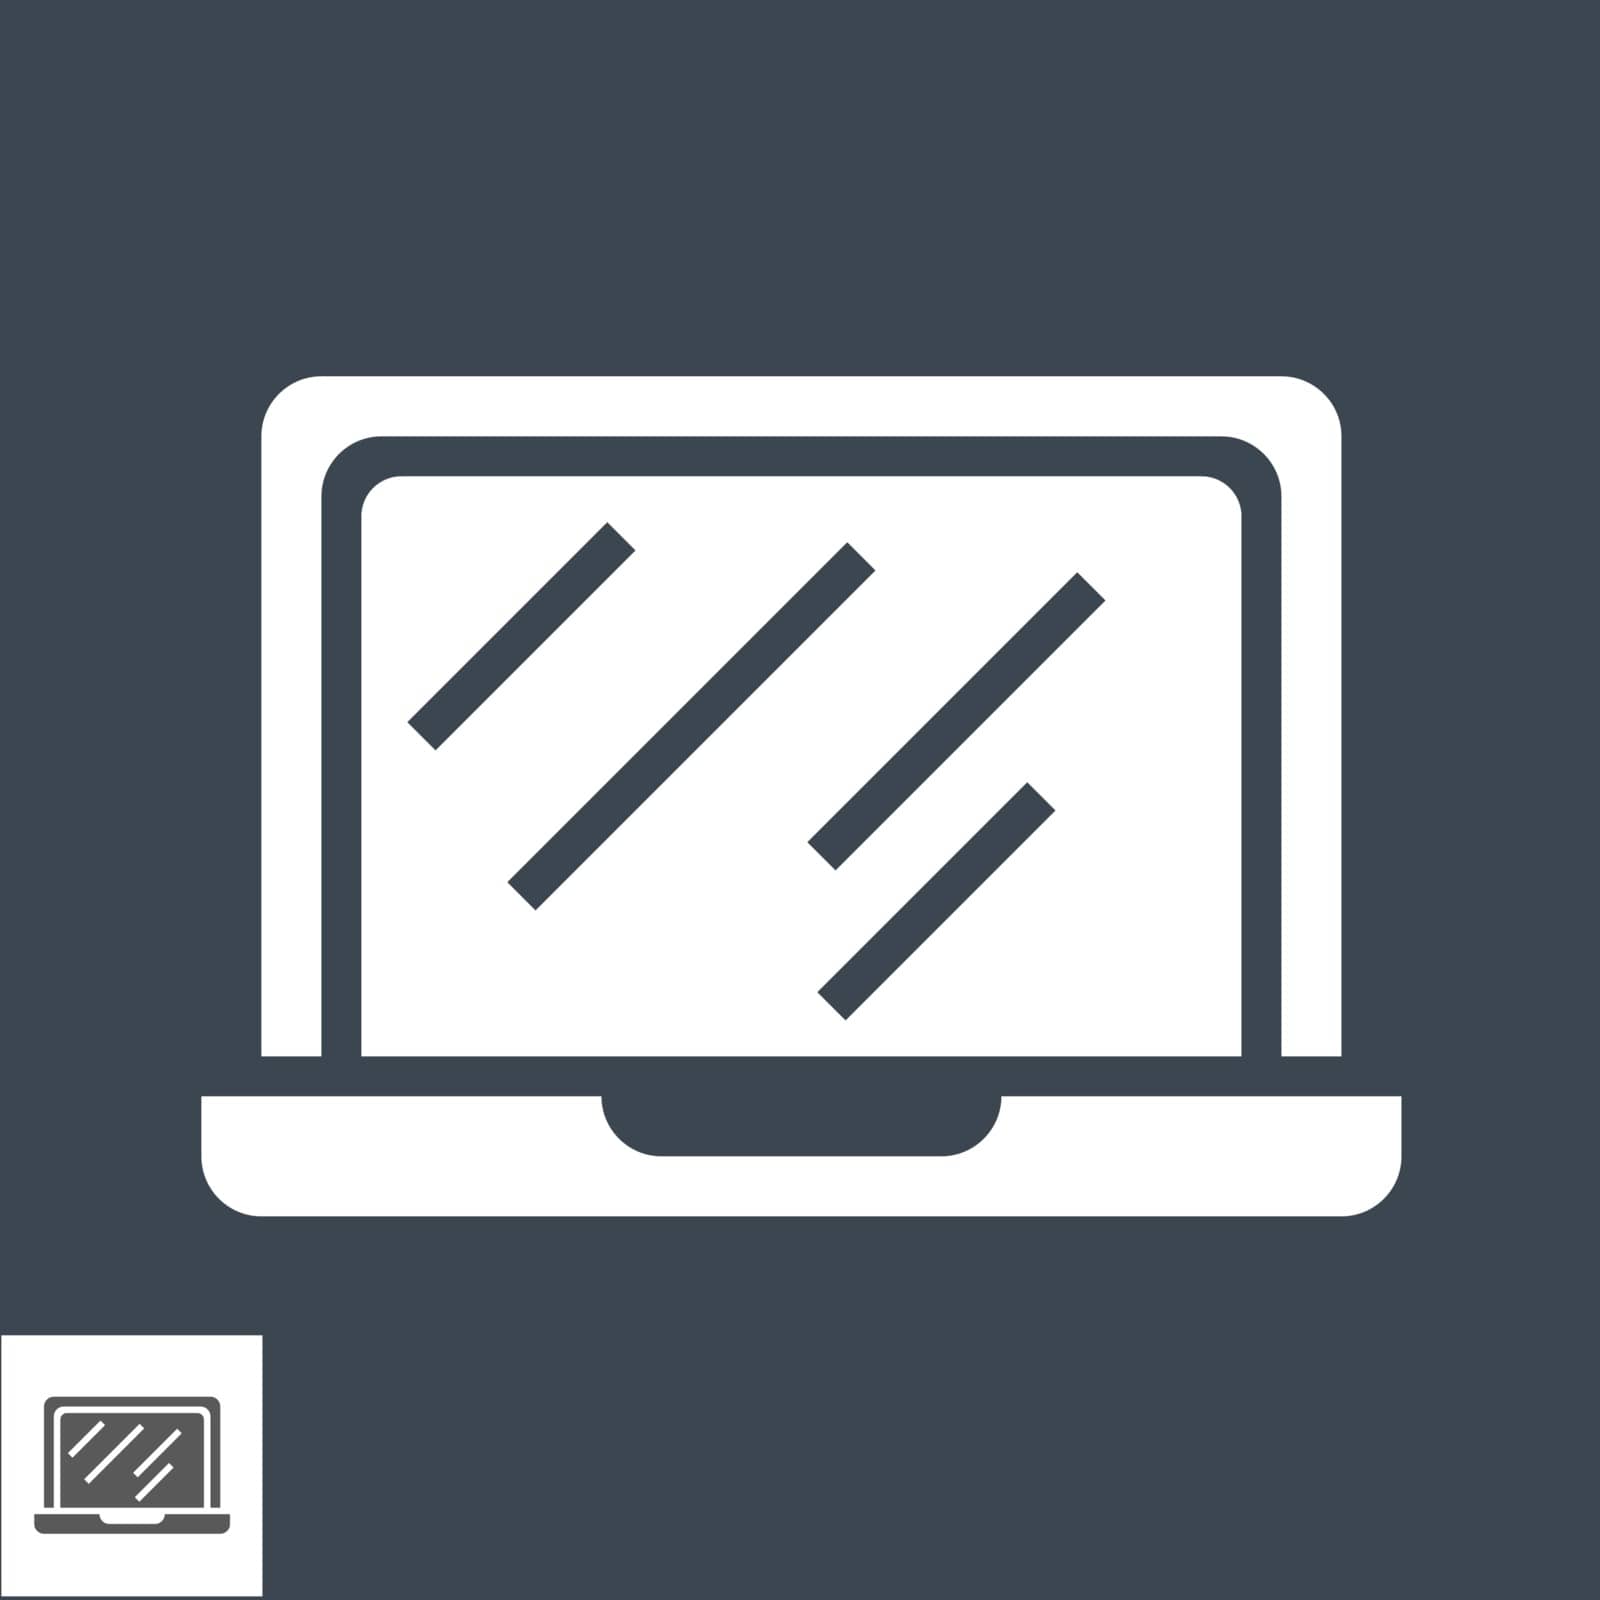 Laptop Related Vector Glyph Icon. Isolated on Black Background. Vector Illustration.